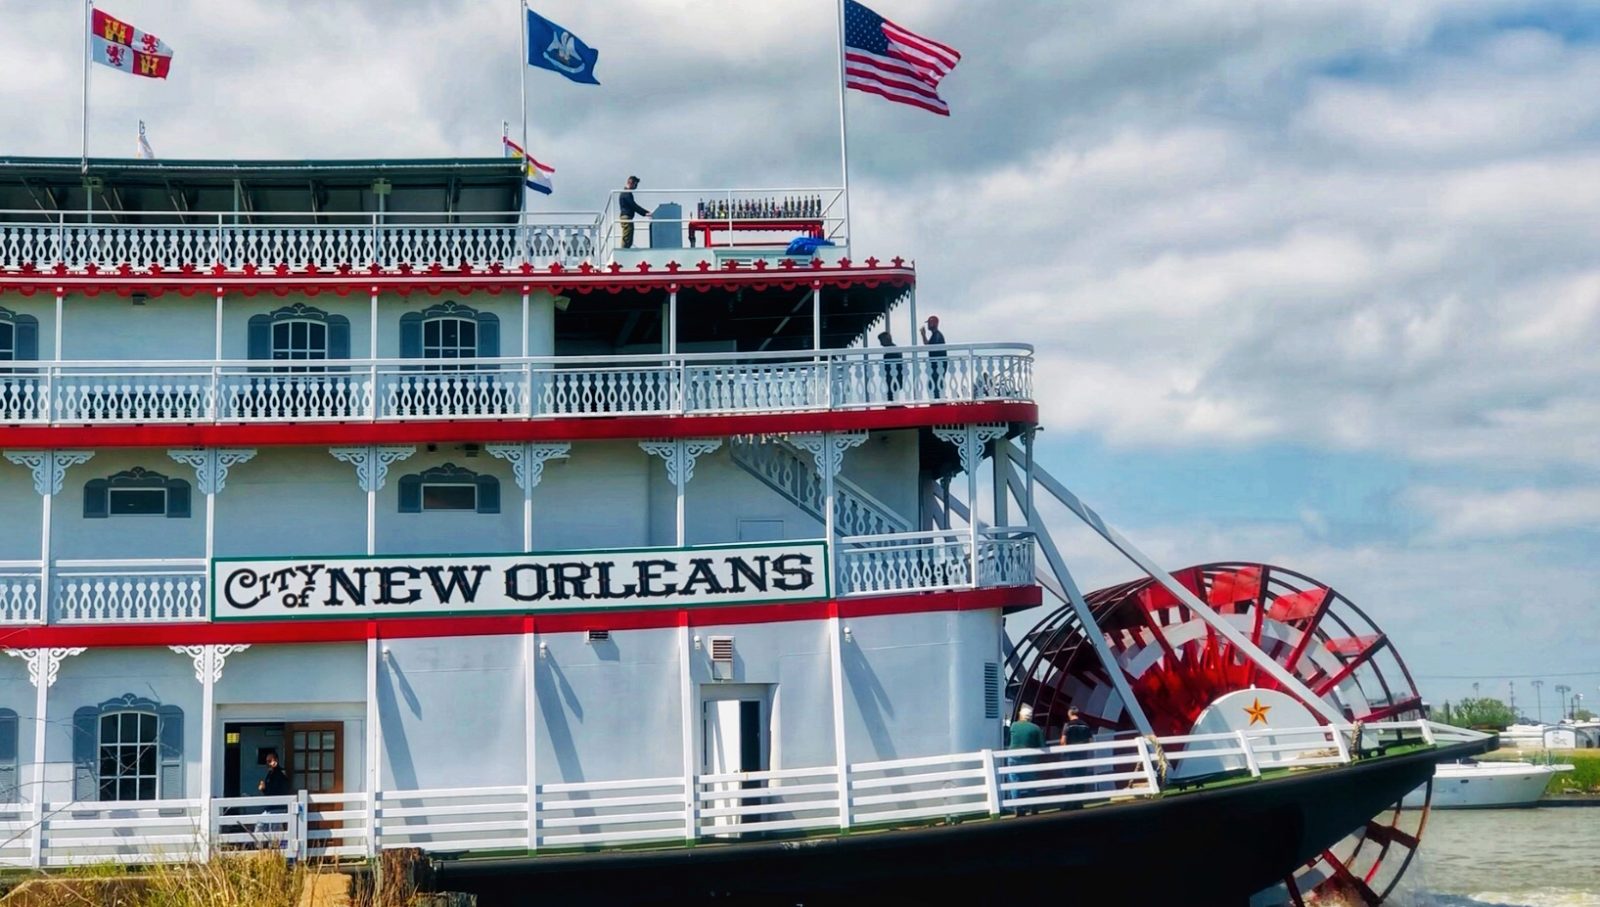 Riverboat City of New Orleans Steamboat Natchez